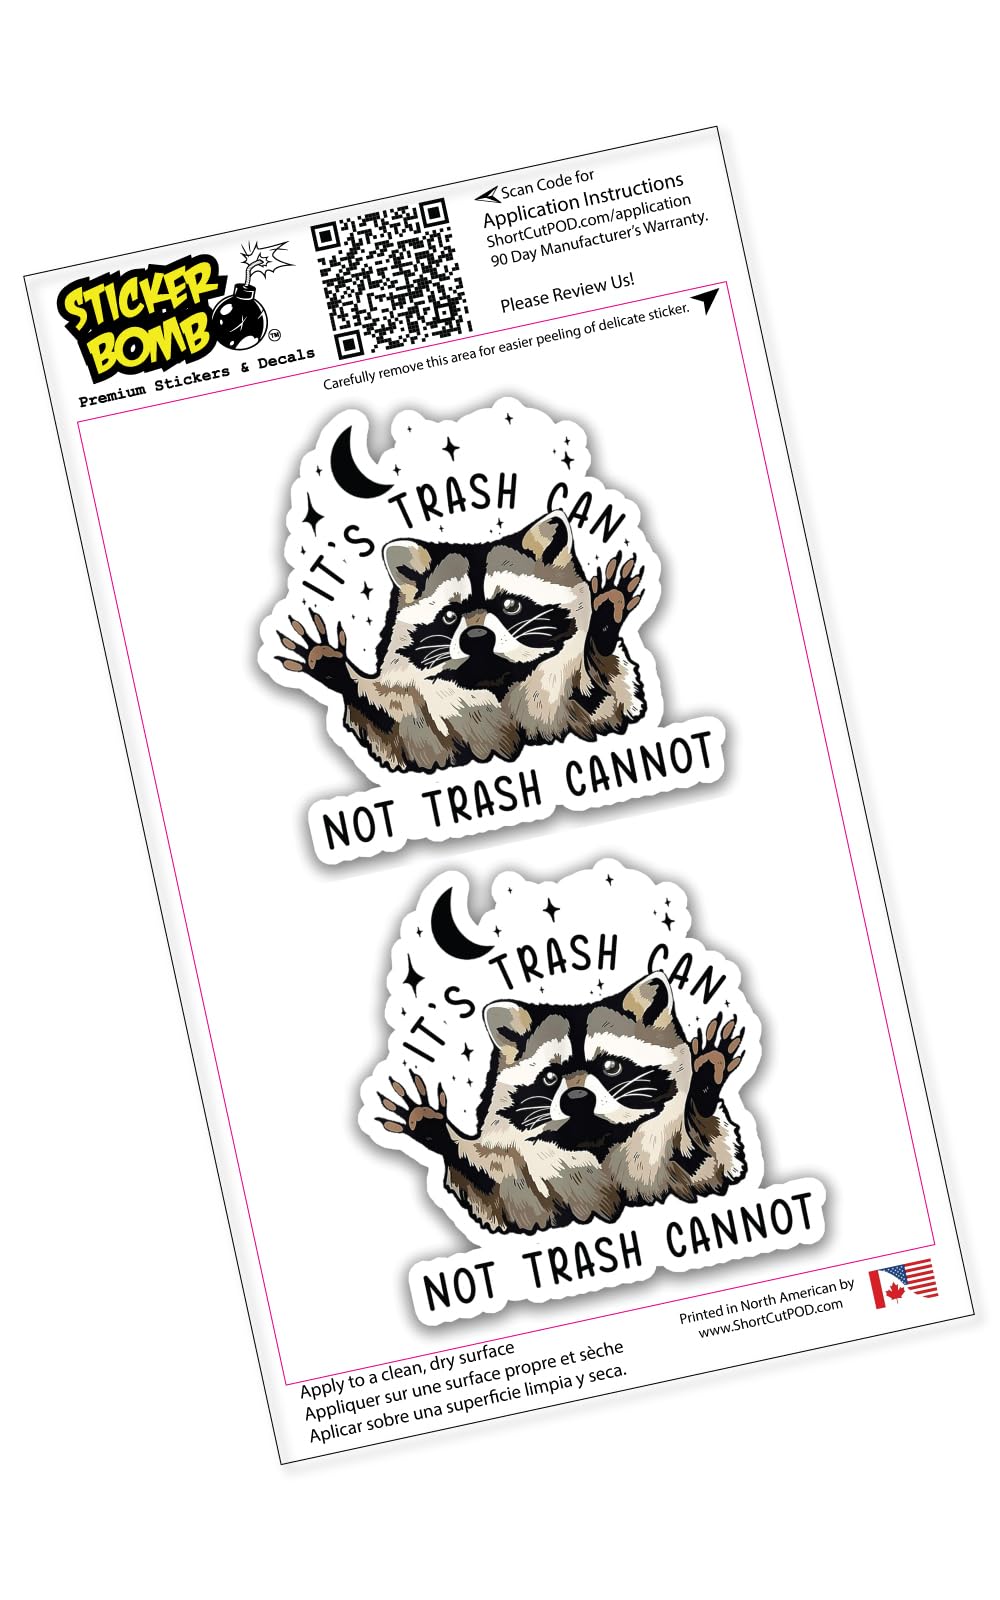 Sticker Bomb Vinyl It's Trash Can Not Trash Cannot 2 Pack Sticker, Screaming Possum Sticker, Book Stickers, Die-Cut Vinyl Funny Decals for Laptop Phone Water Bottles